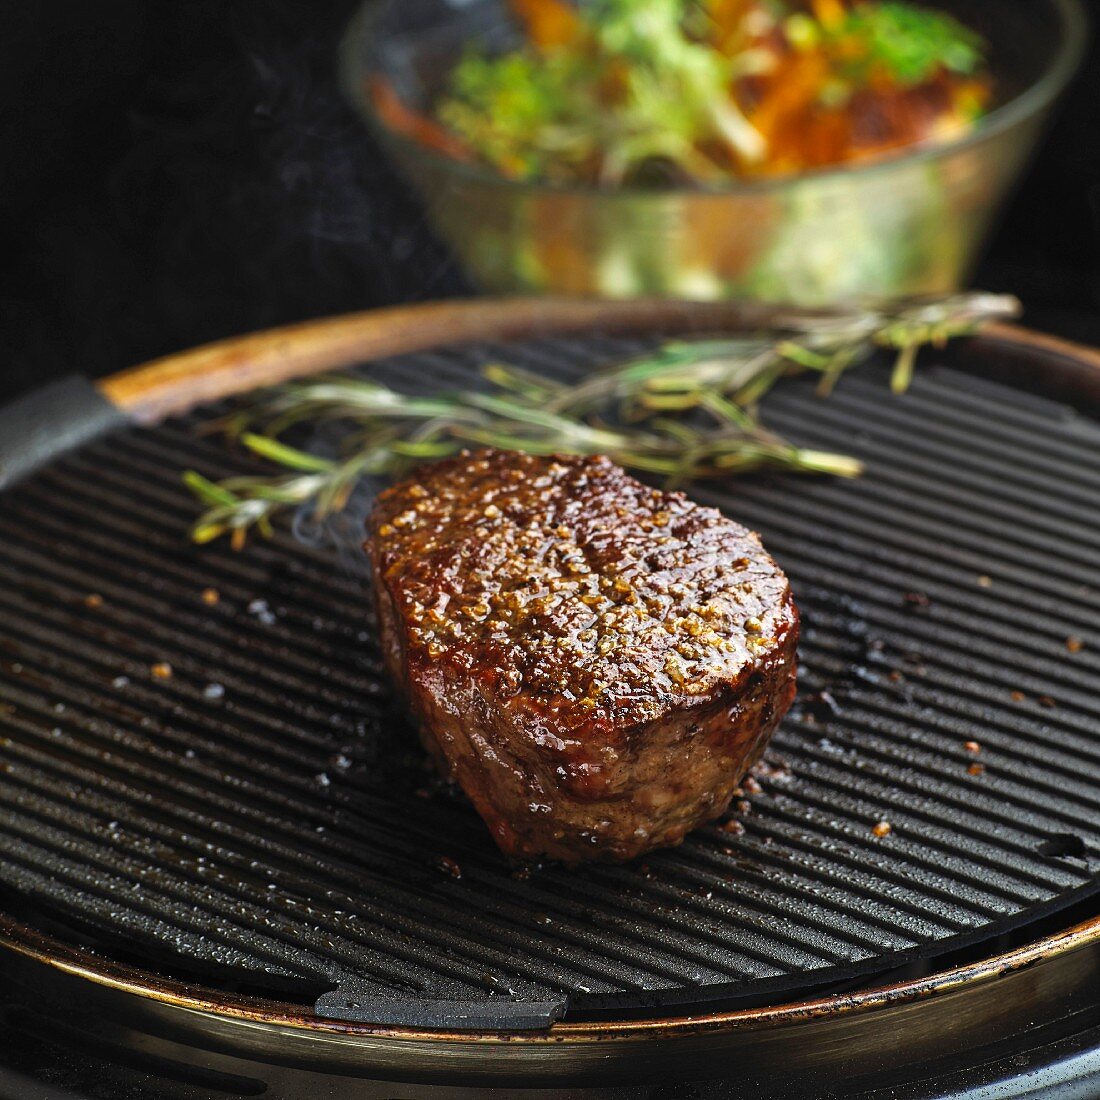 Beef fillet steak on a grill in front of a salad bowl